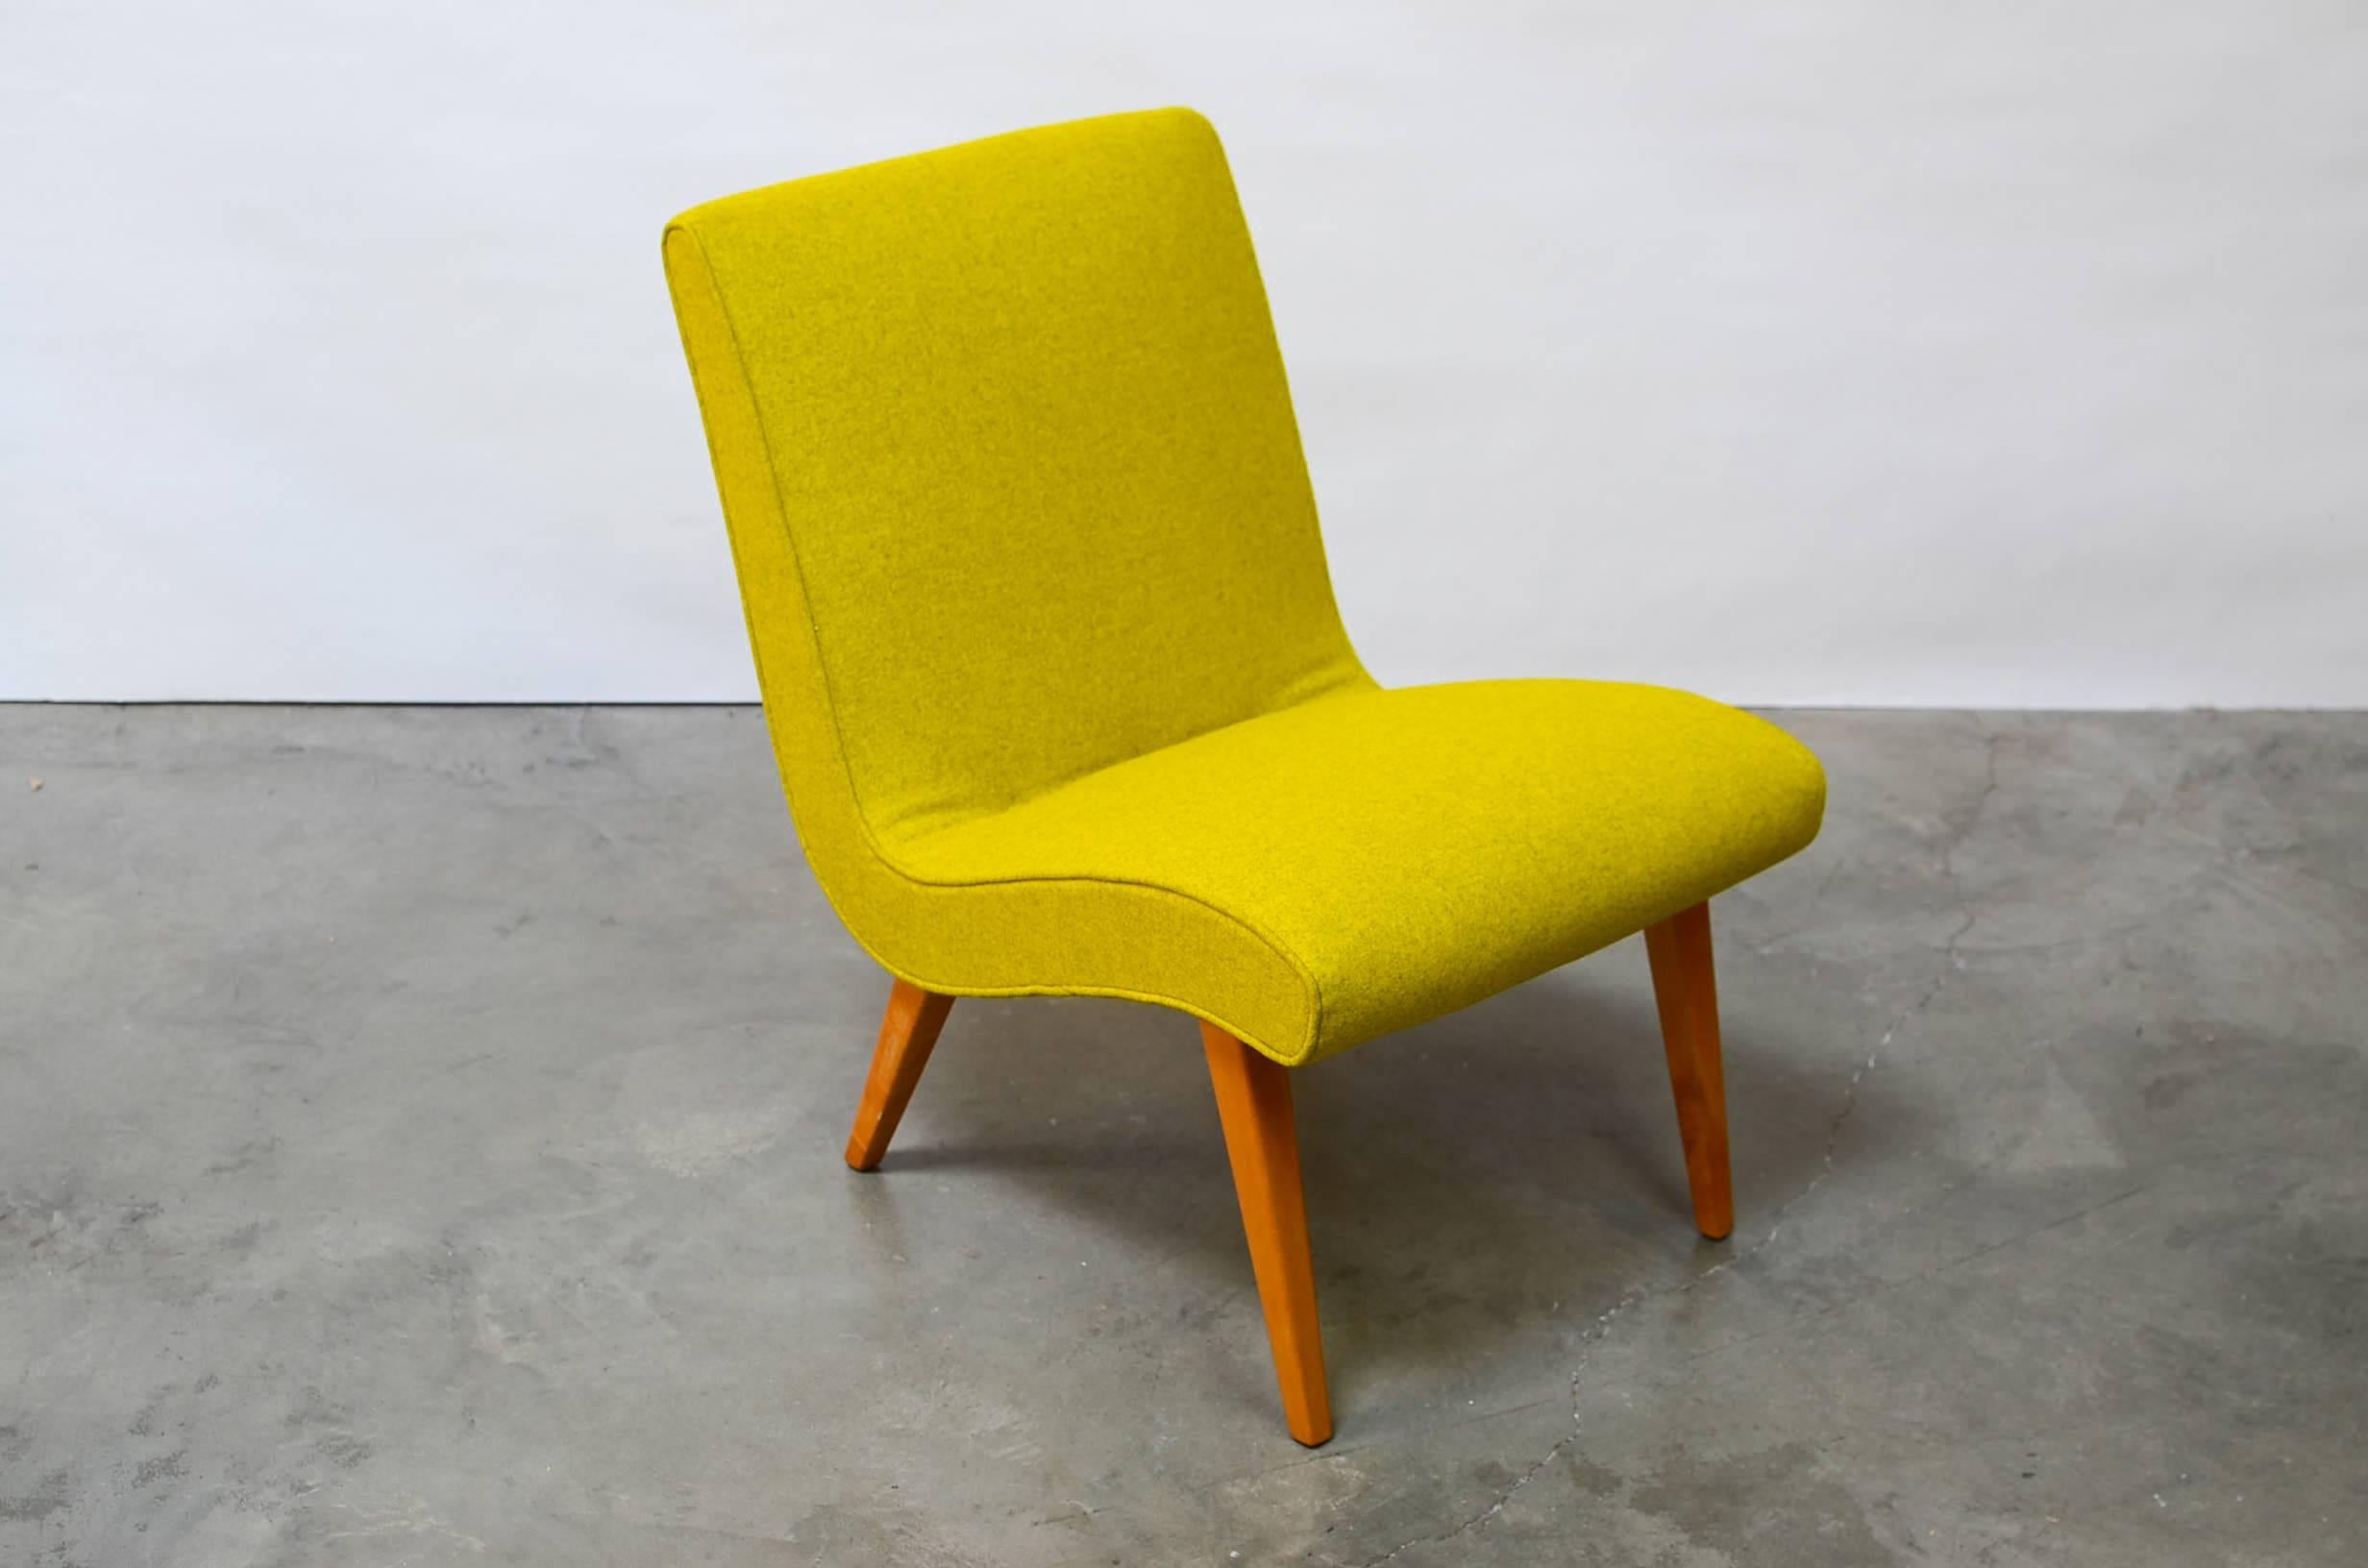 Great example of an early knoll Post-war design. Designed by Jens Risom for Hans Knoll/Knoll Associates. Retains early label. Very few of these early chairs ever come to market.

Correctly reupholstered to factory spec. in Maharam chartreuse